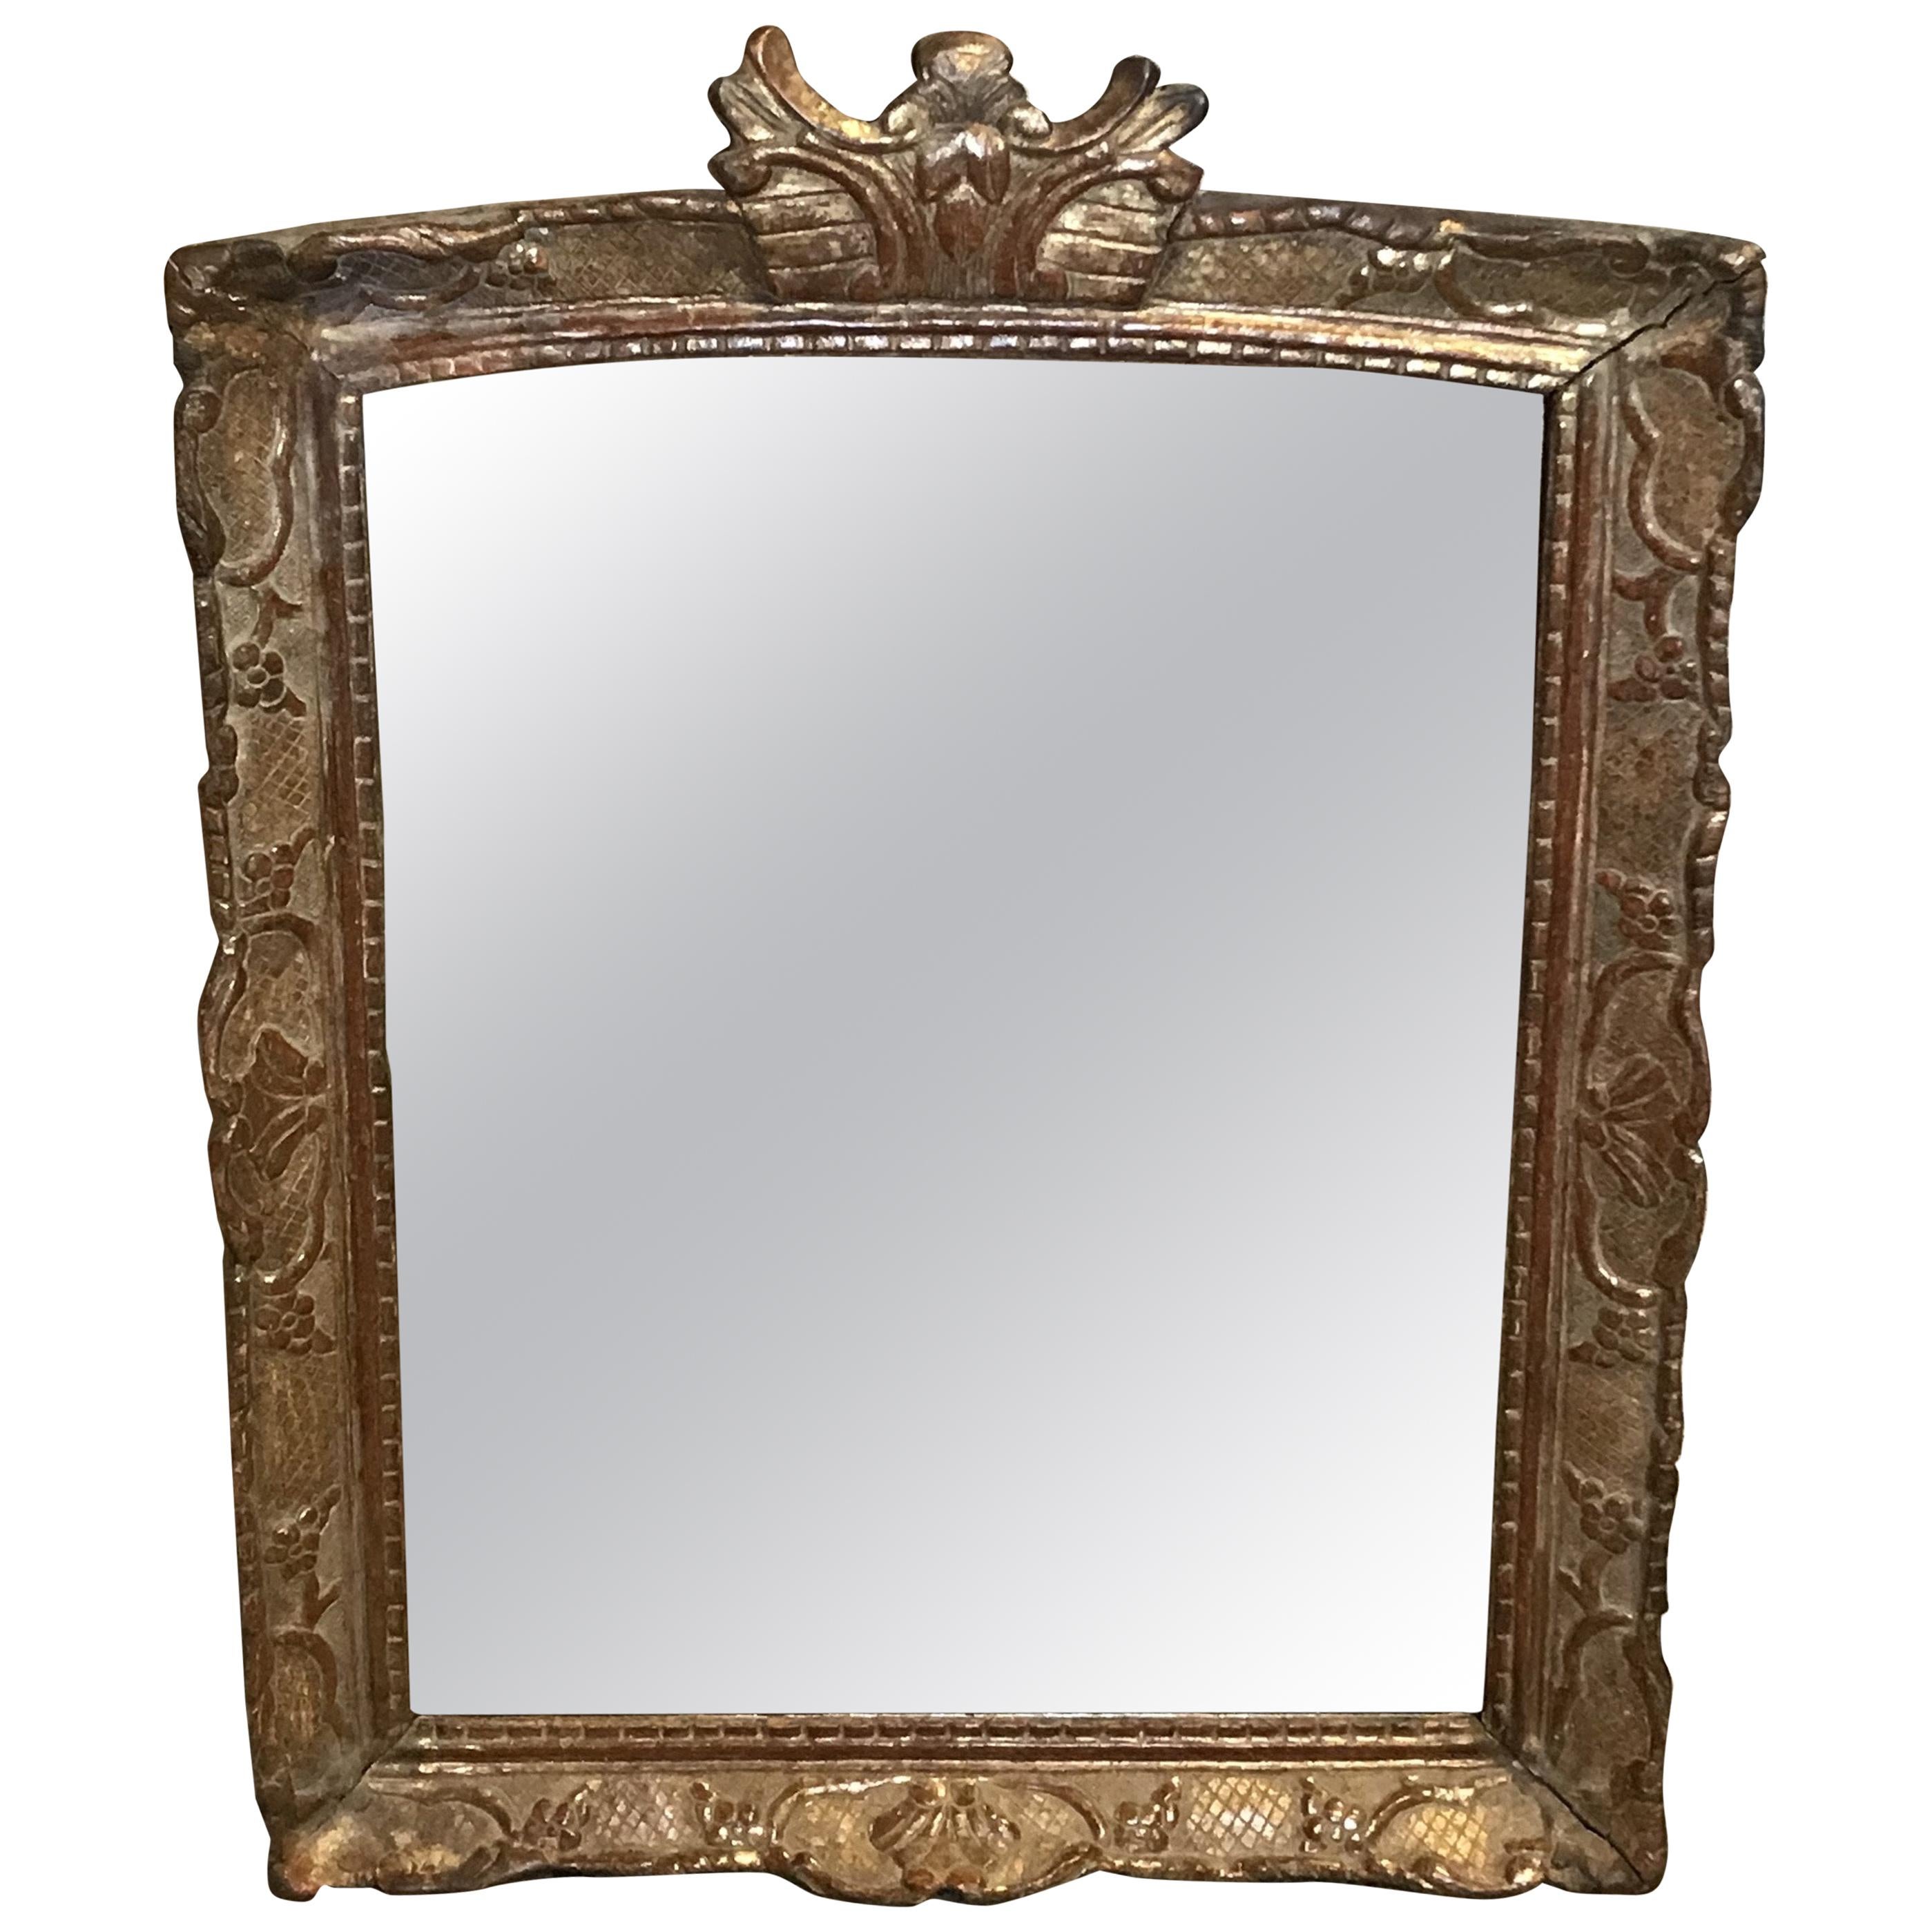 Lovely 19th Century Giltwood Mirror with Loads of Character